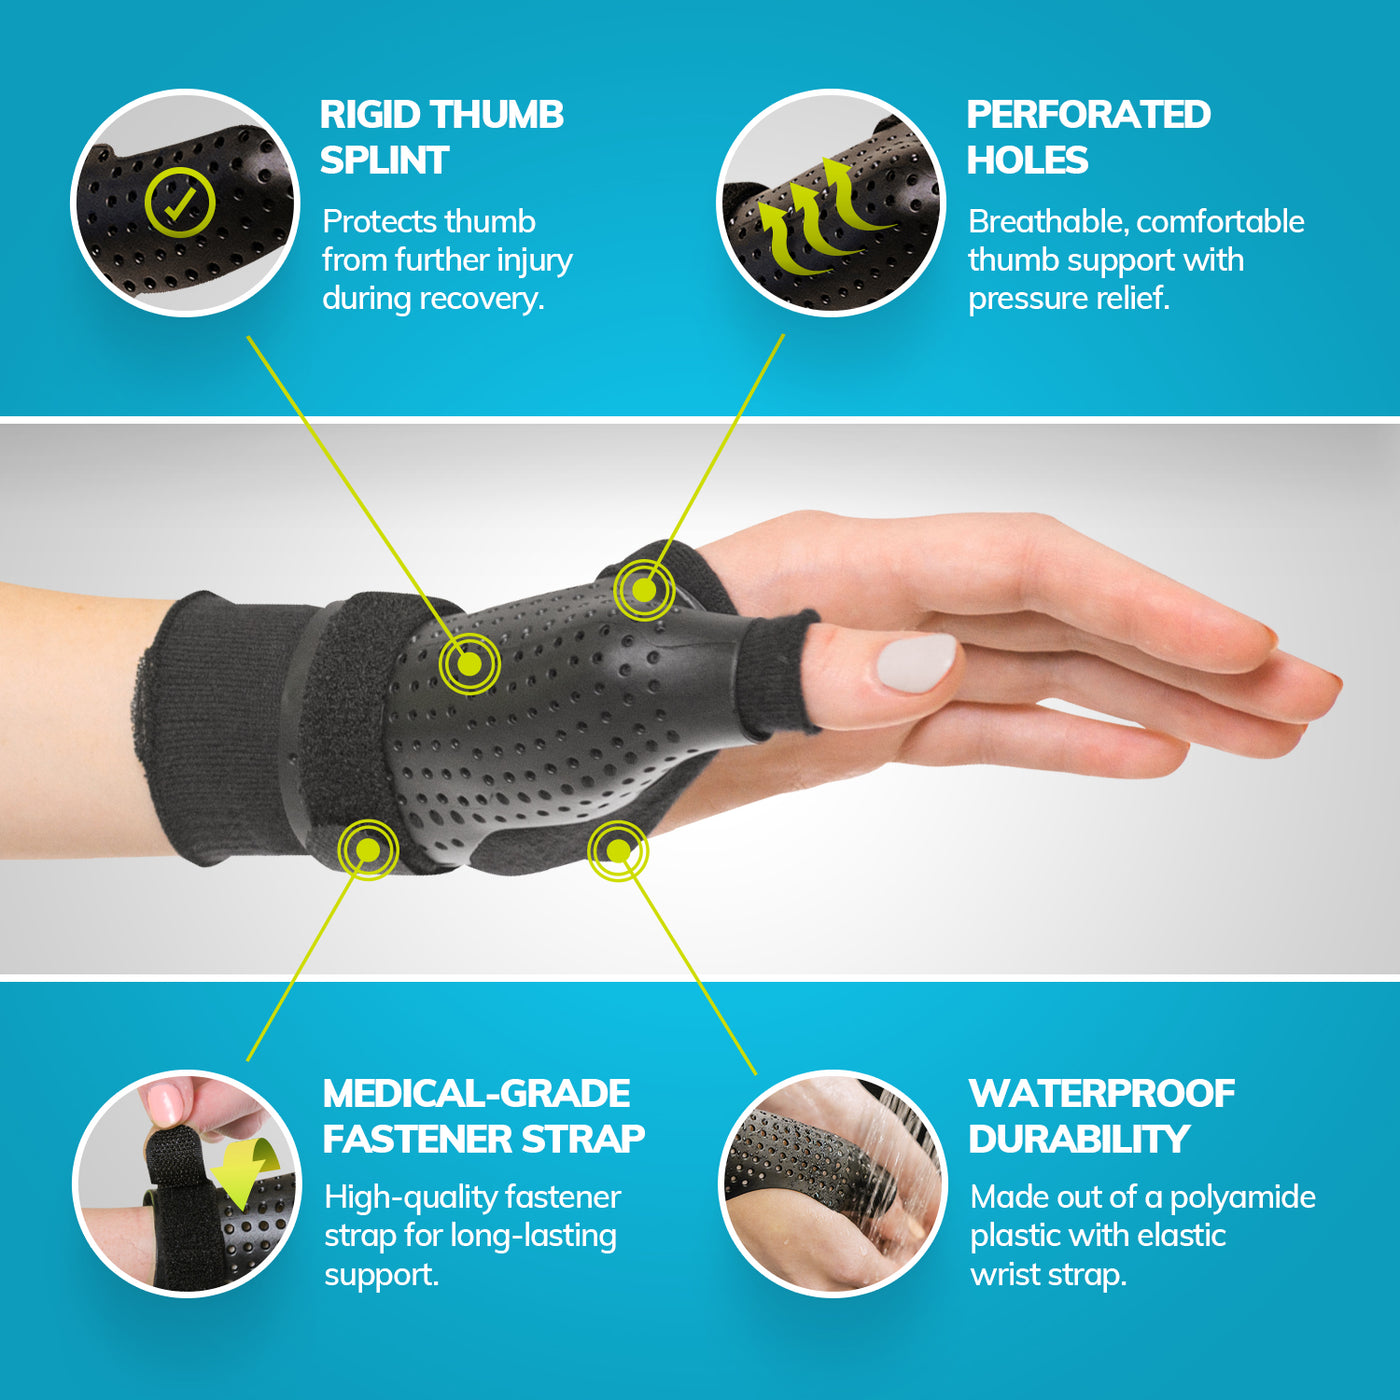 our breathable thumb spica is made with rigid plastic to protect thumb injuries